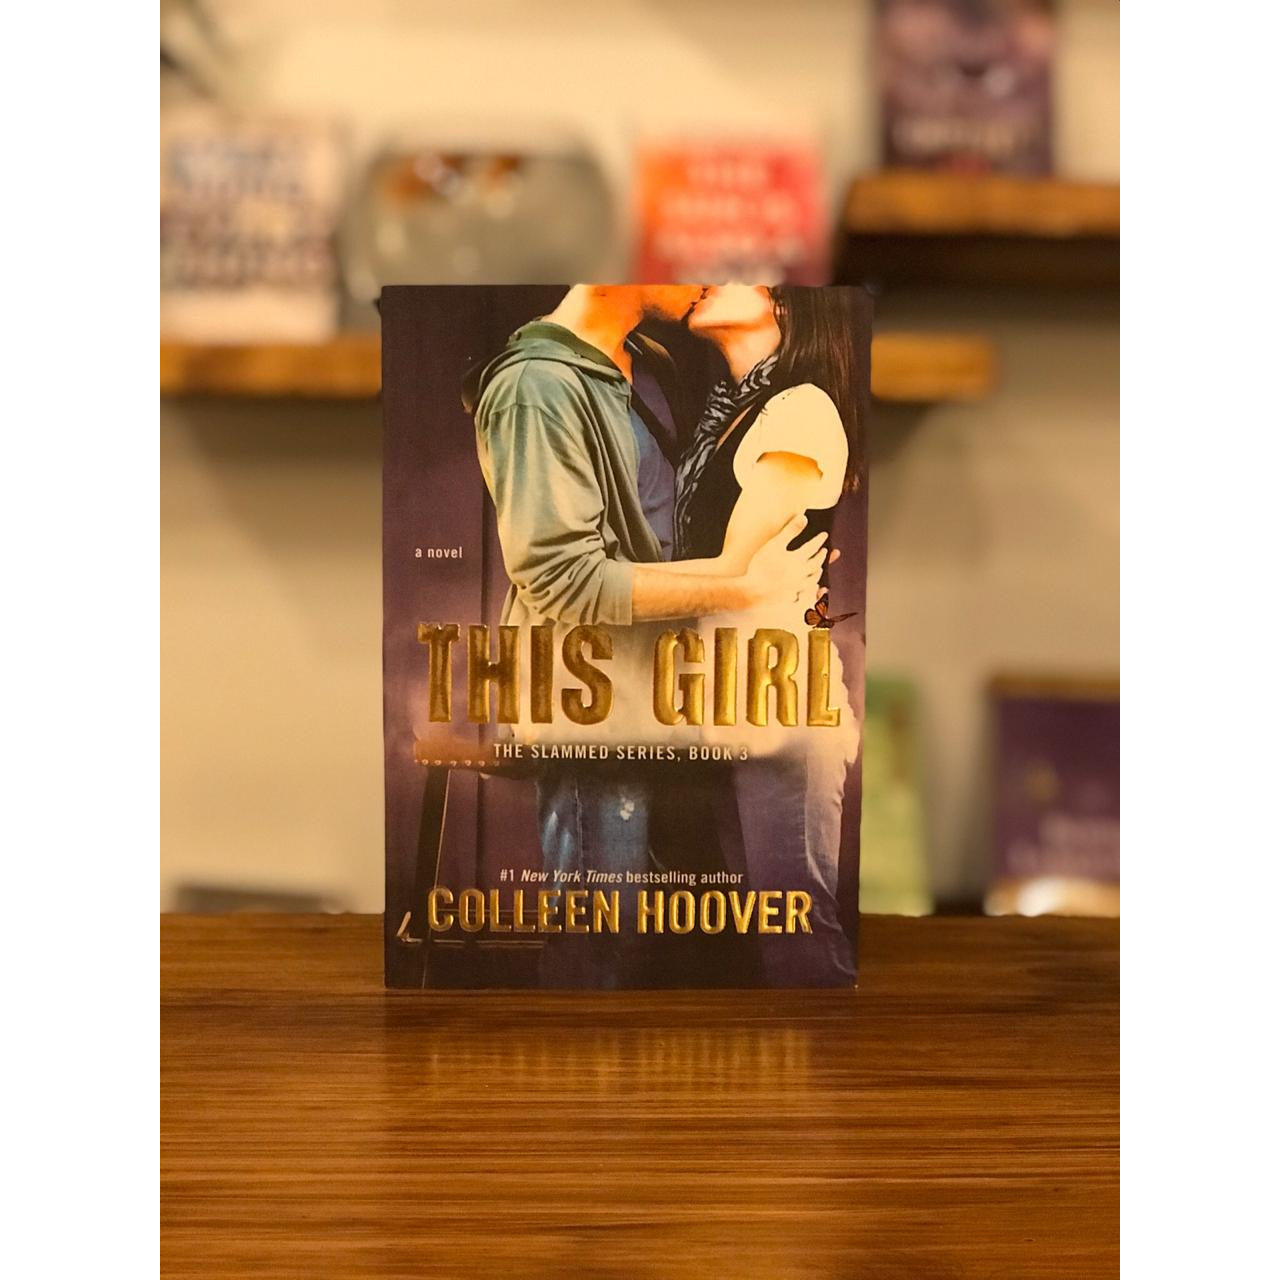 This girl by colleen hoover